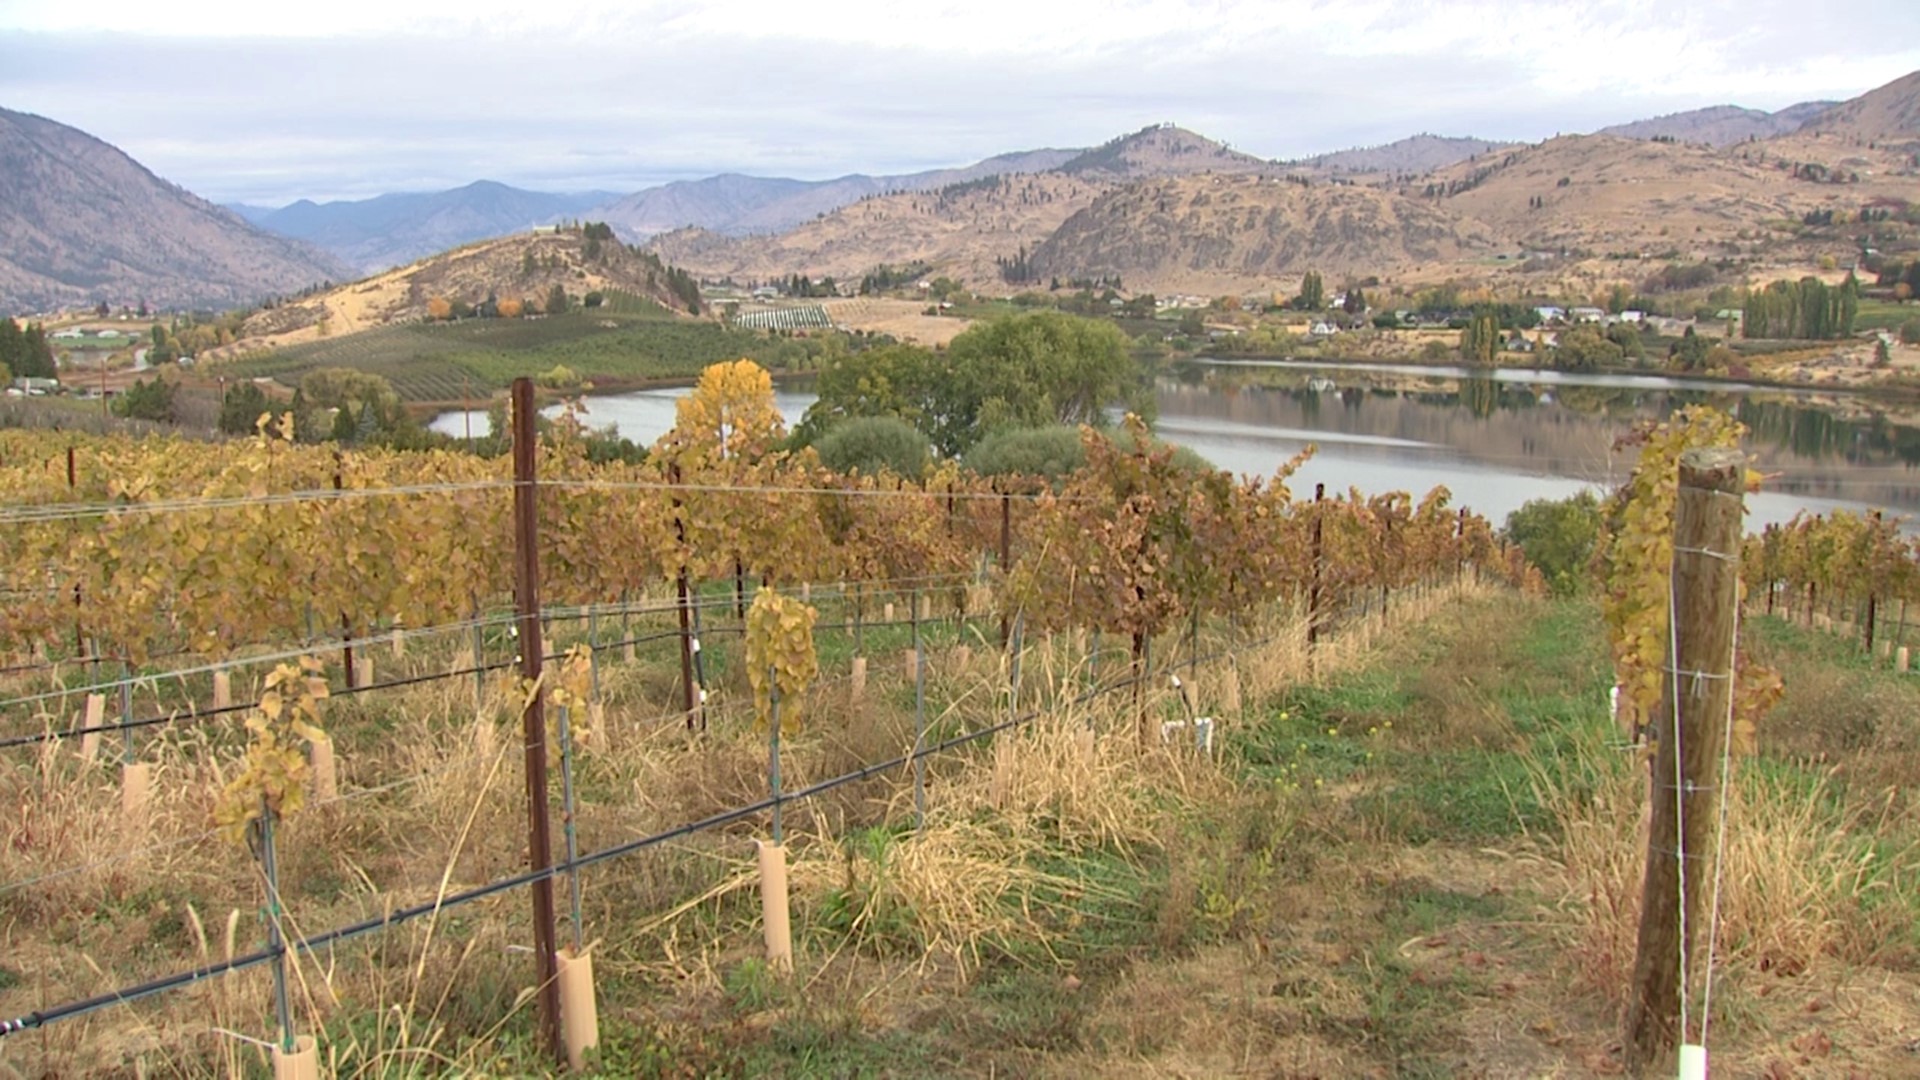 Experience the magic of agritourism at this Manson farm. Sponsored by Lake Chelan Chamber of Commerce